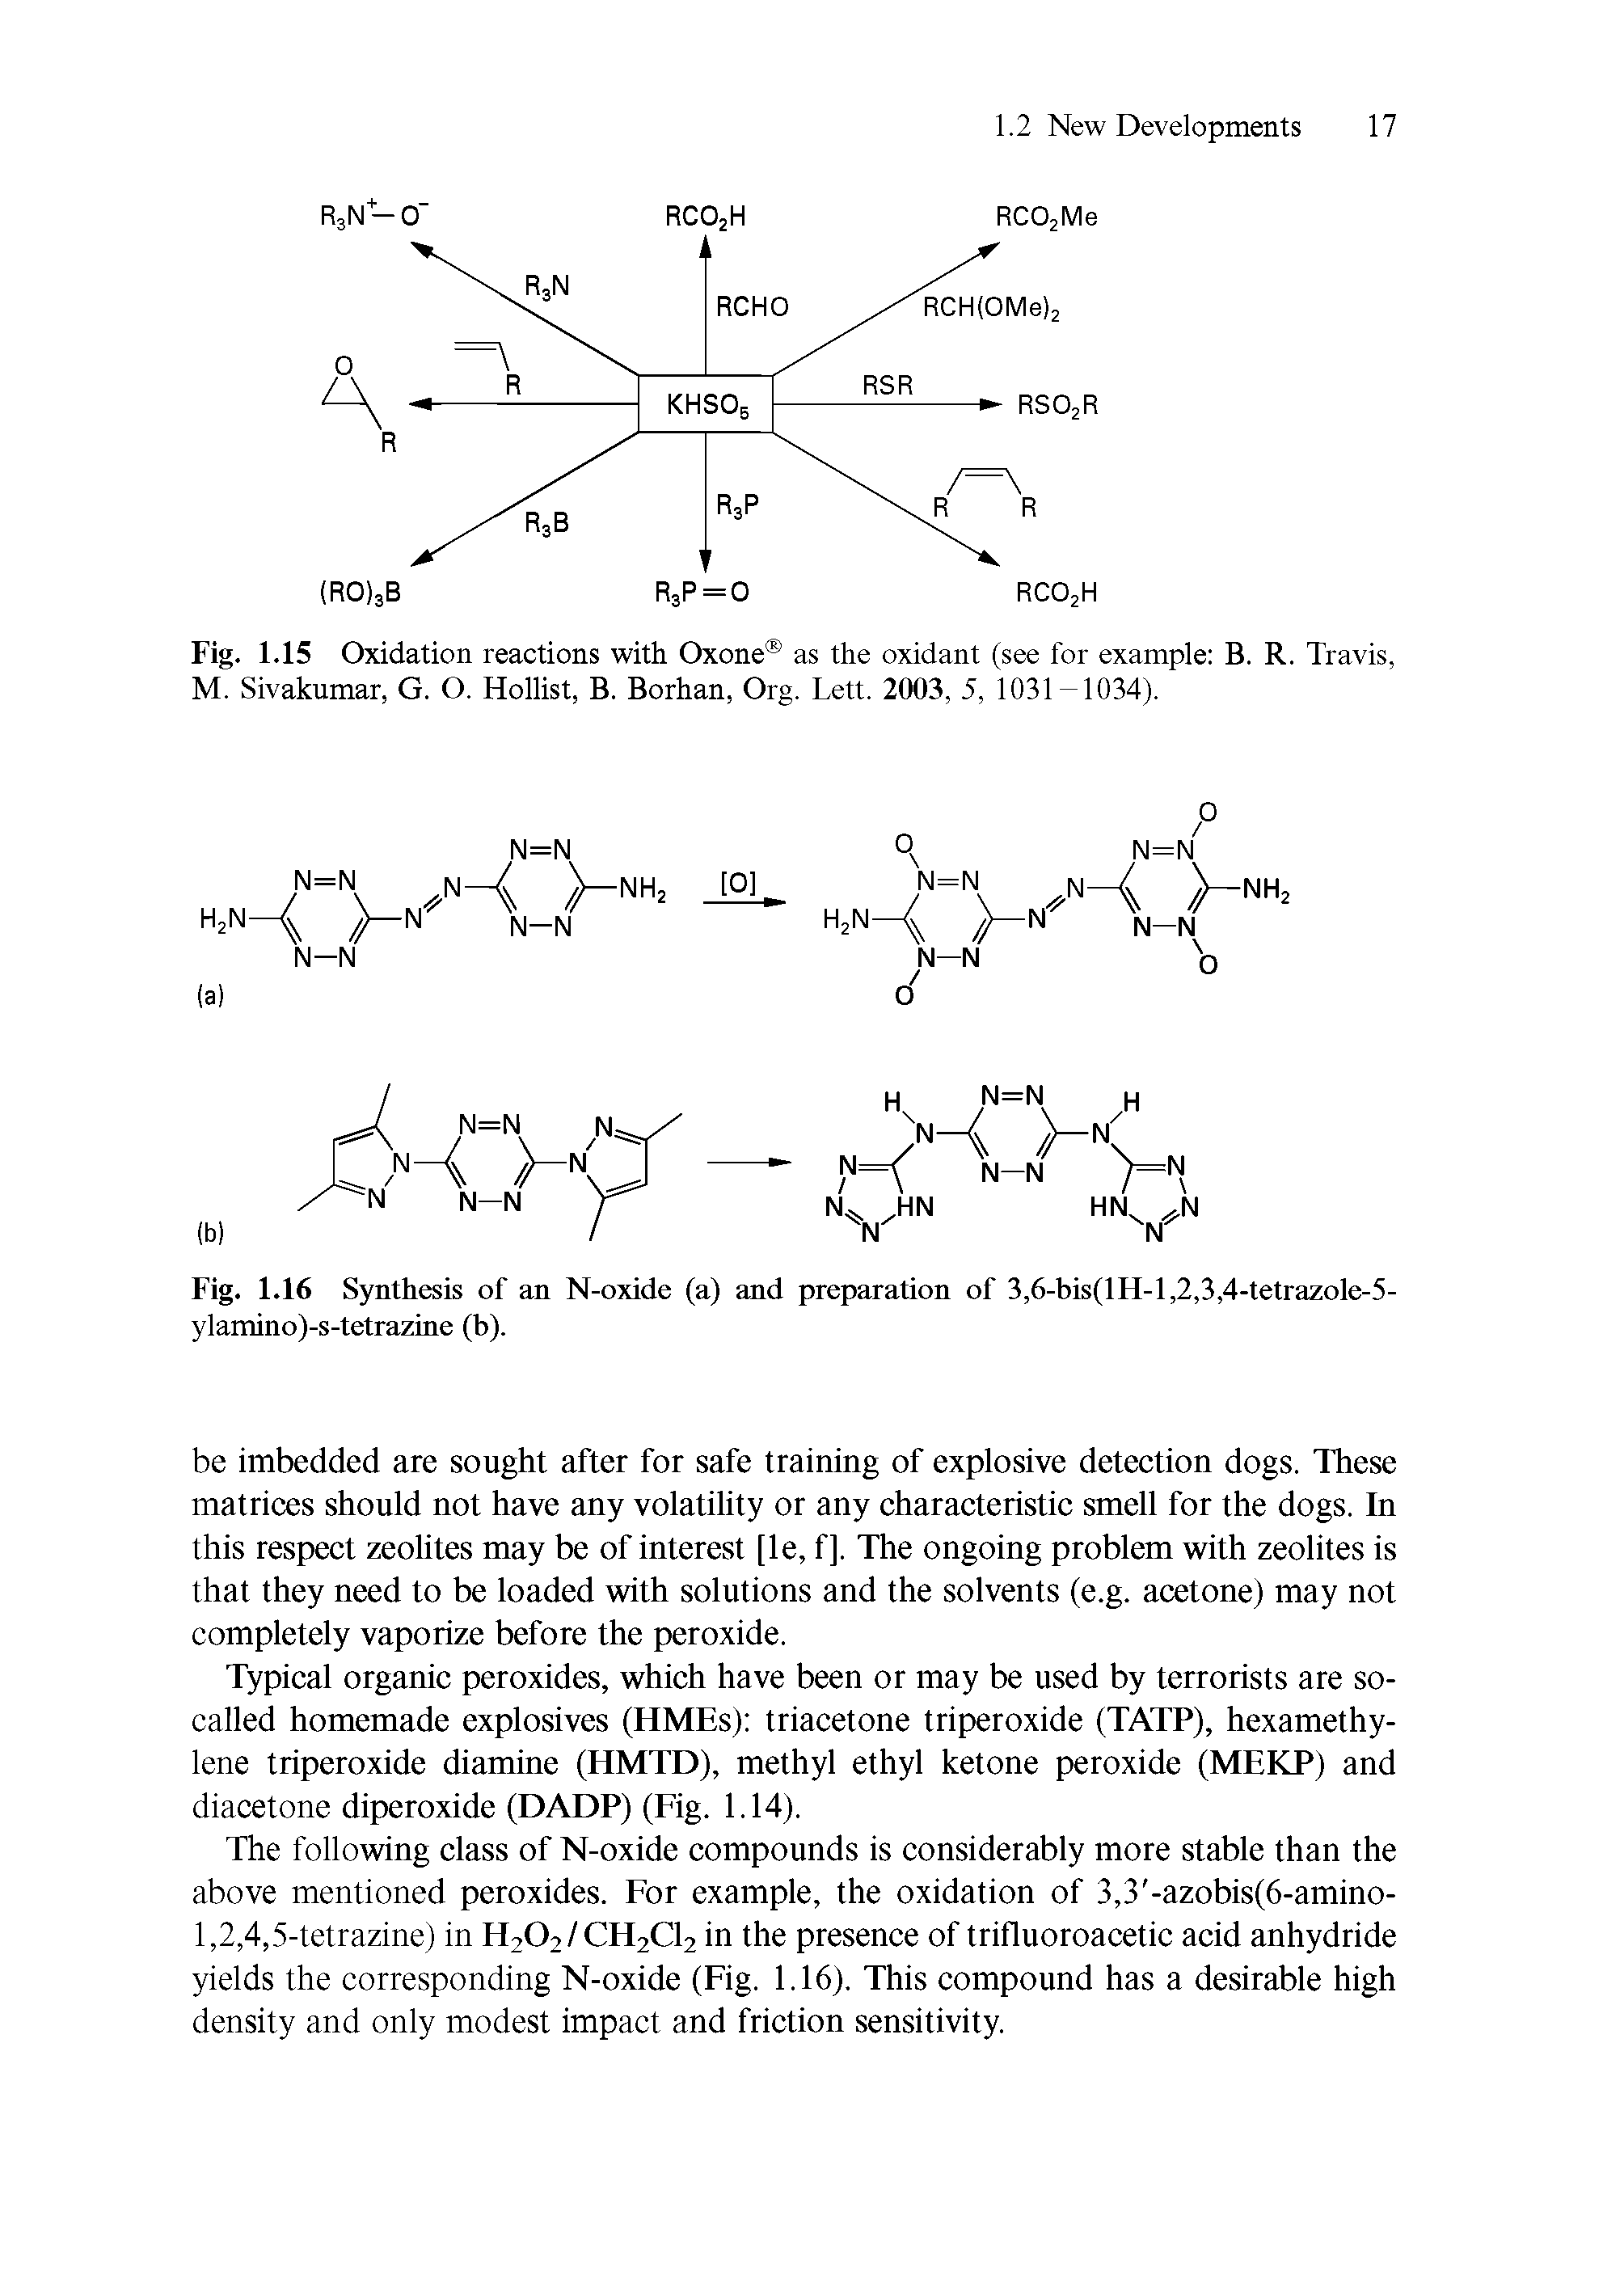 Fig. 1.15 Oxidation reactions with Oxone as the oxidant (see for example B. R. Travis, M. Sivakumar, G. O. Hollist, B. Borhan, Org. Lett. 2003, 5, 1031-1034).